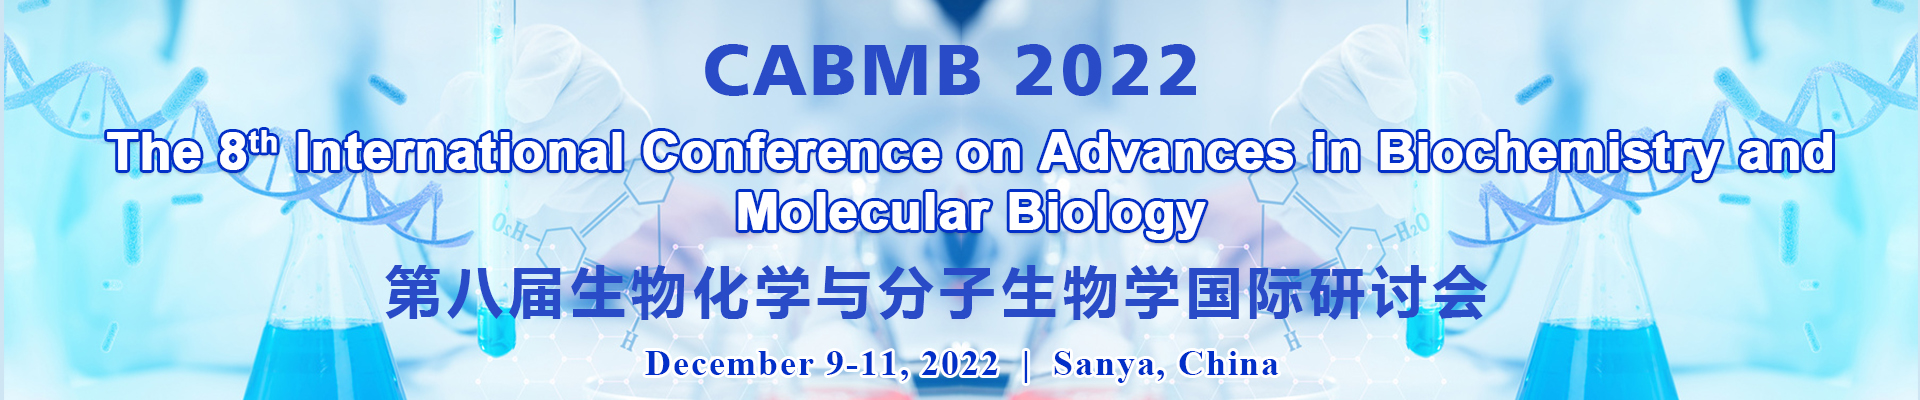 The 8th International Conference on Advances in Biochemistry and Molecular Biology (CABMB 2022)